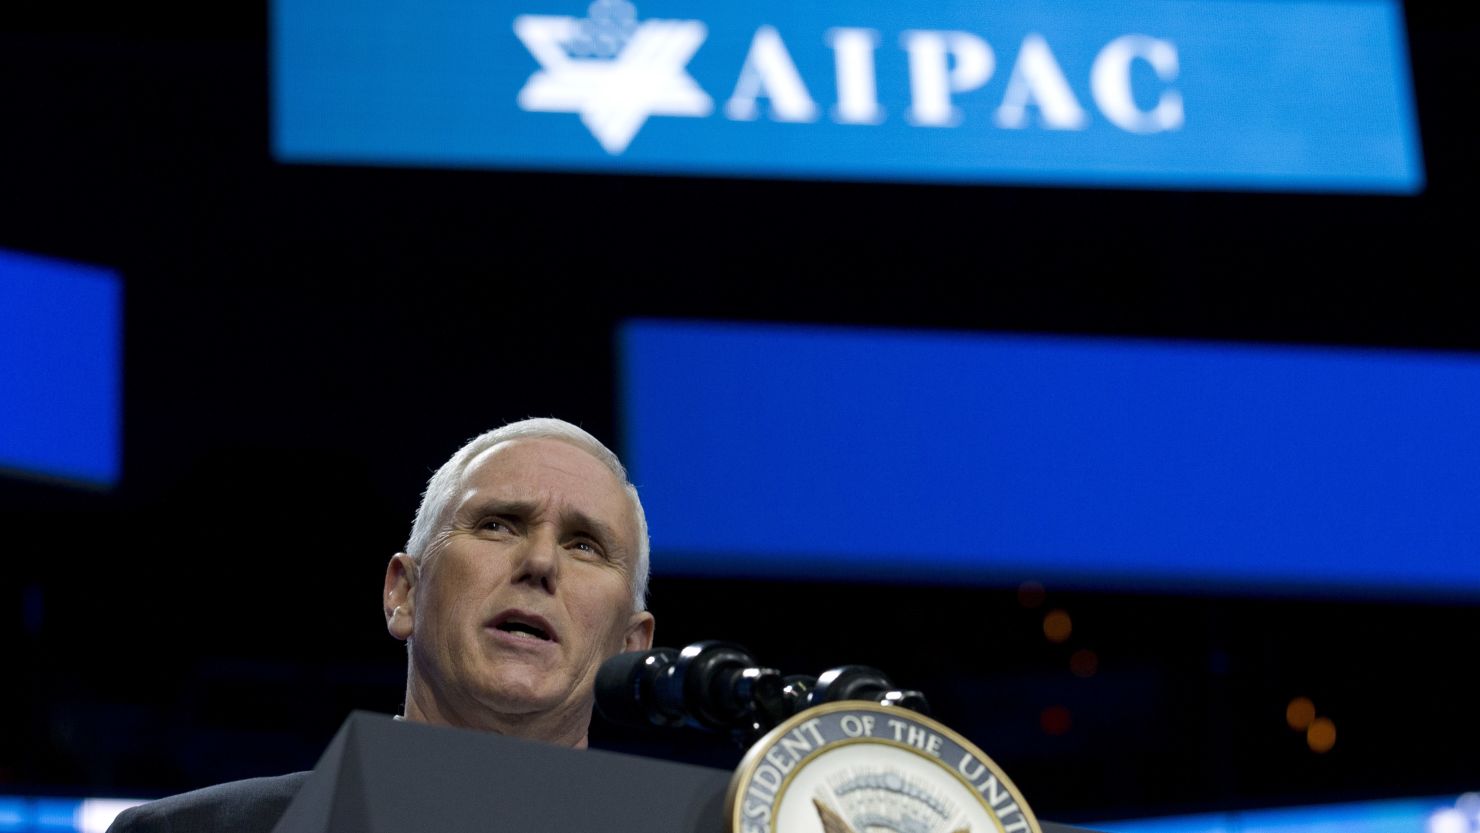 Vice President Mike Pence, at the AIPAC policy conference in Washington on Sunday